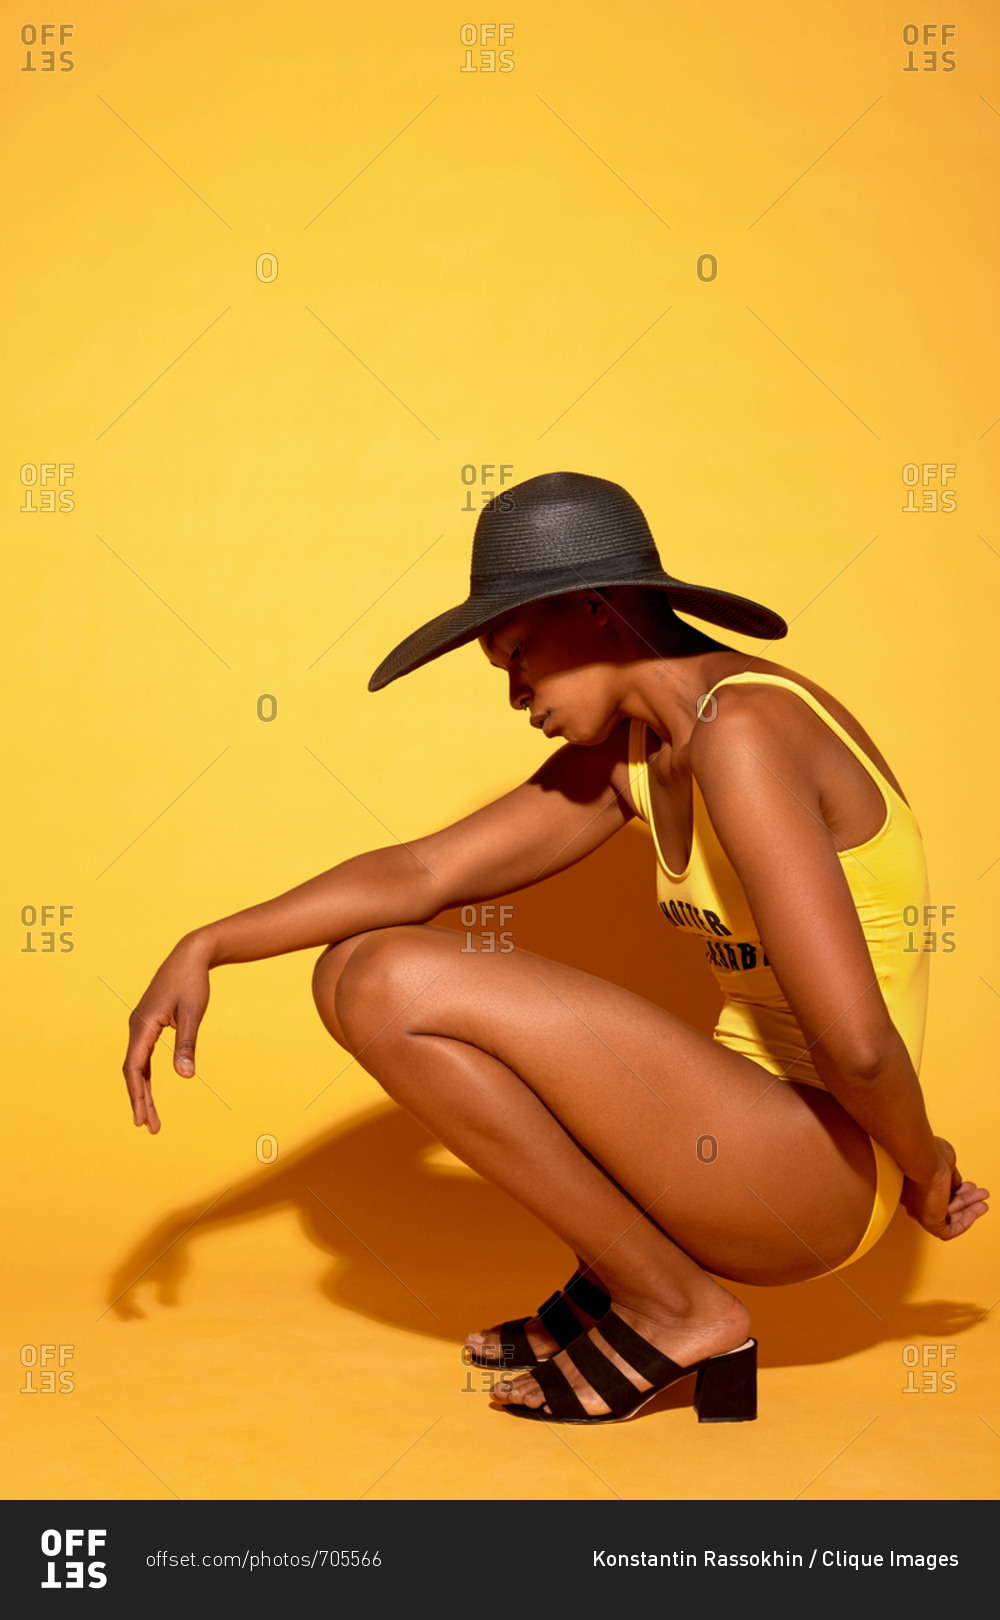 Fashion portrait of slim Black woman in one-piece swimsuit and sun hat posing on camera in squat position against orange background